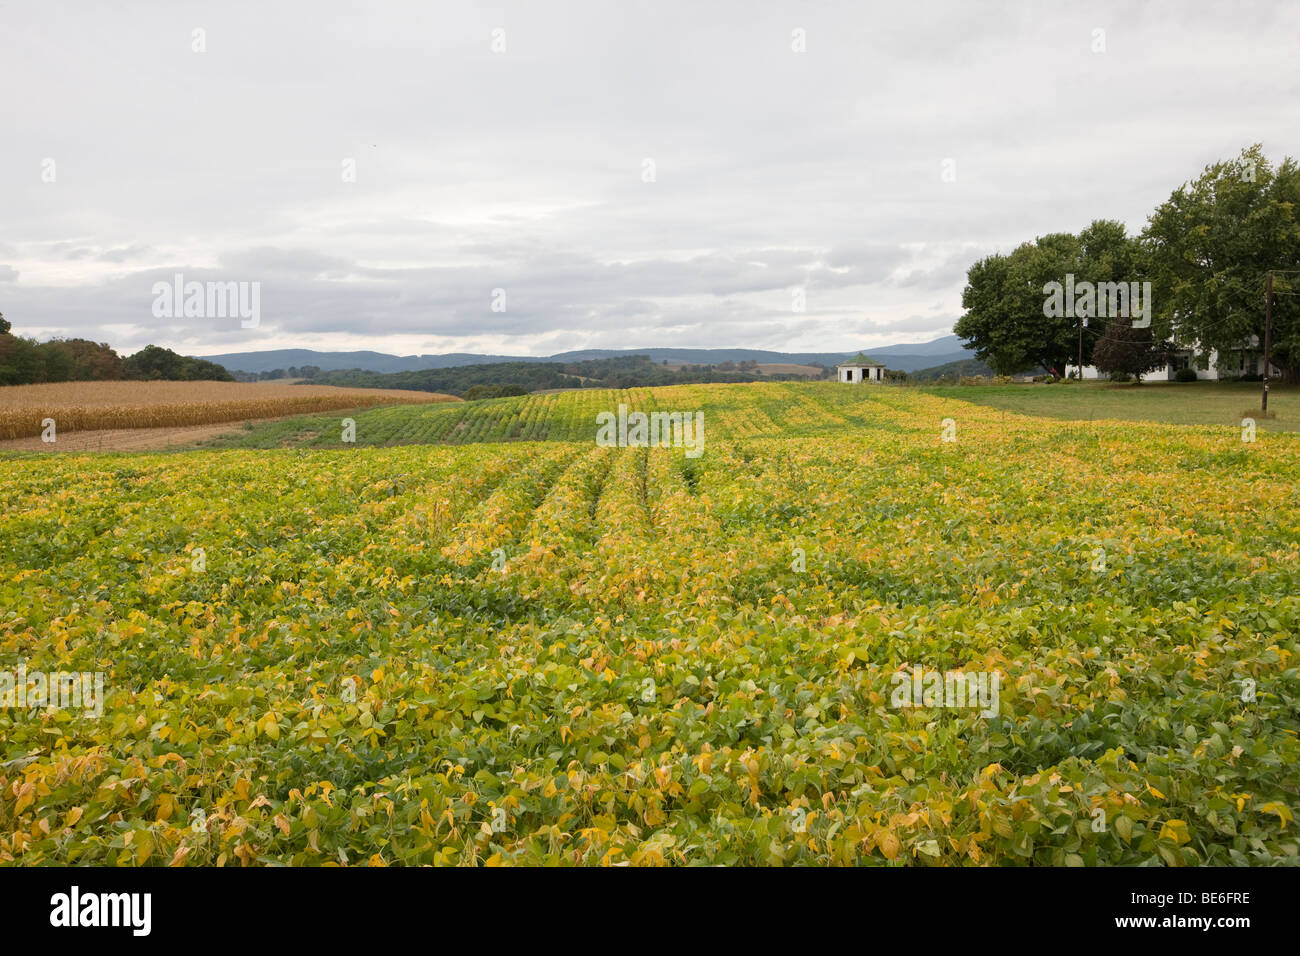 A farm located on a country road in Staunton, Virginia. Stock Photo